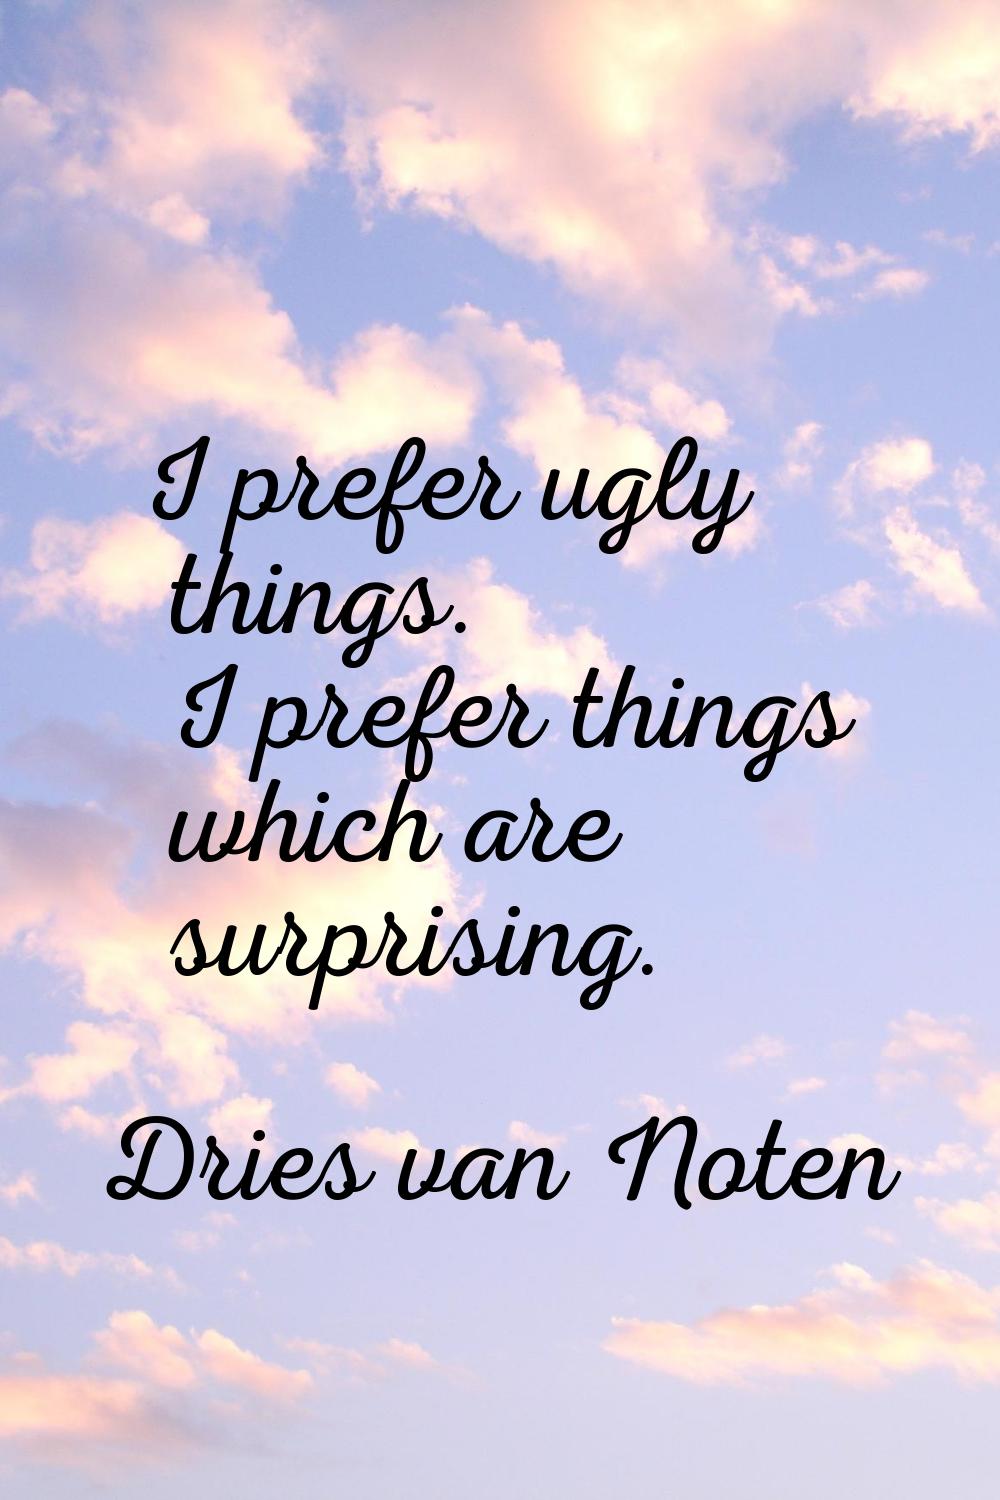 I prefer ugly things. I prefer things which are surprising.